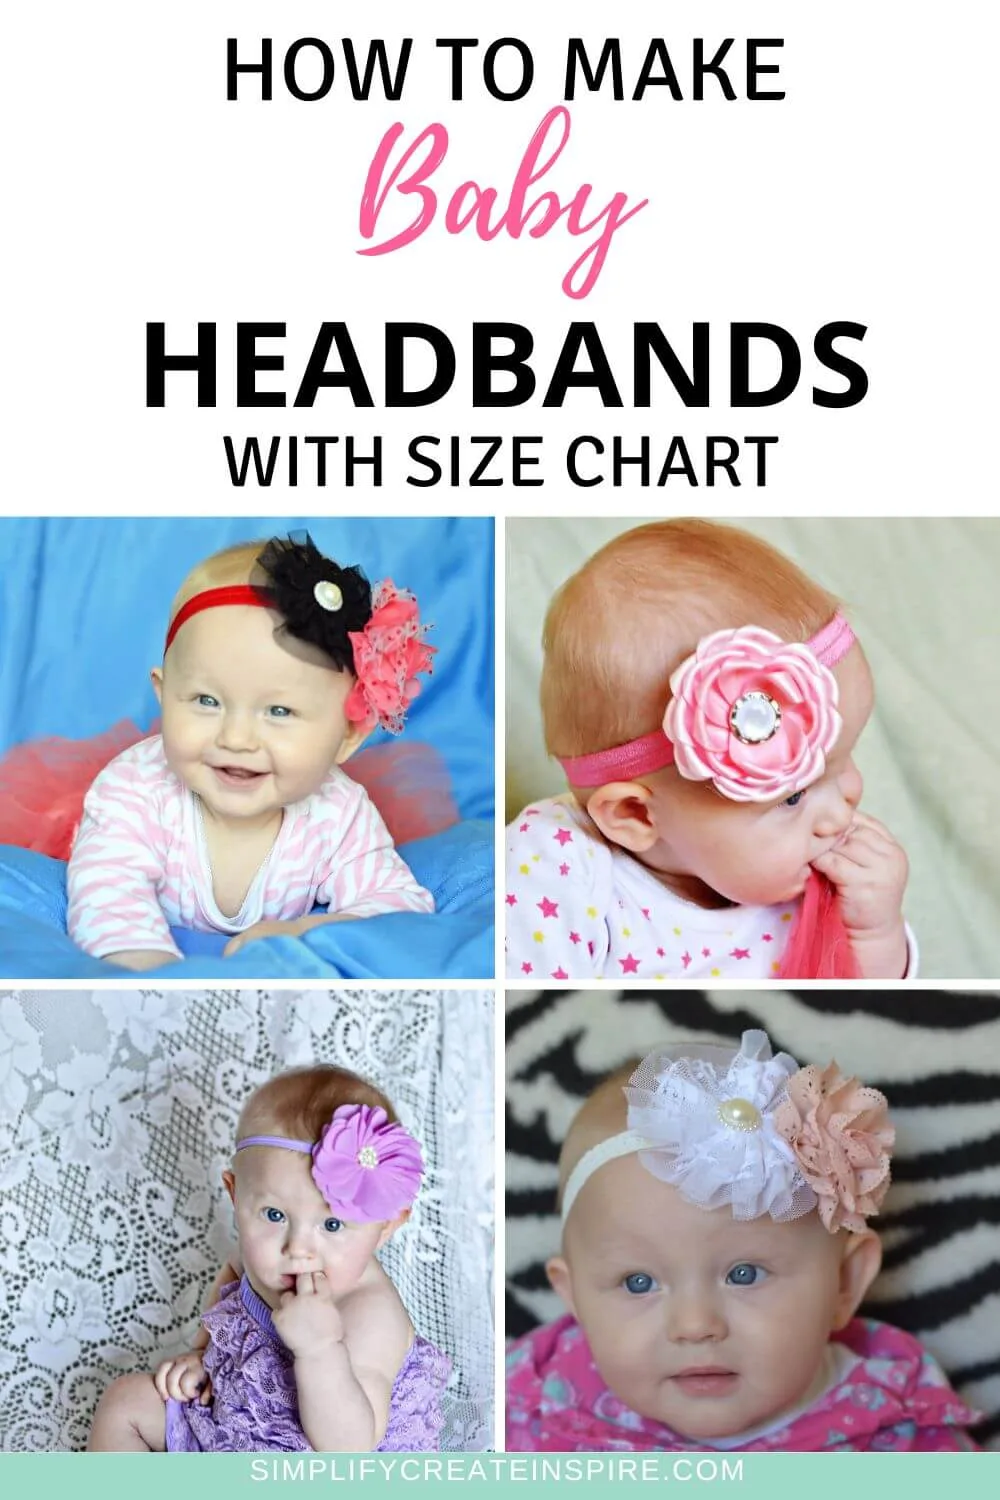 How to make baby headbands with size chart